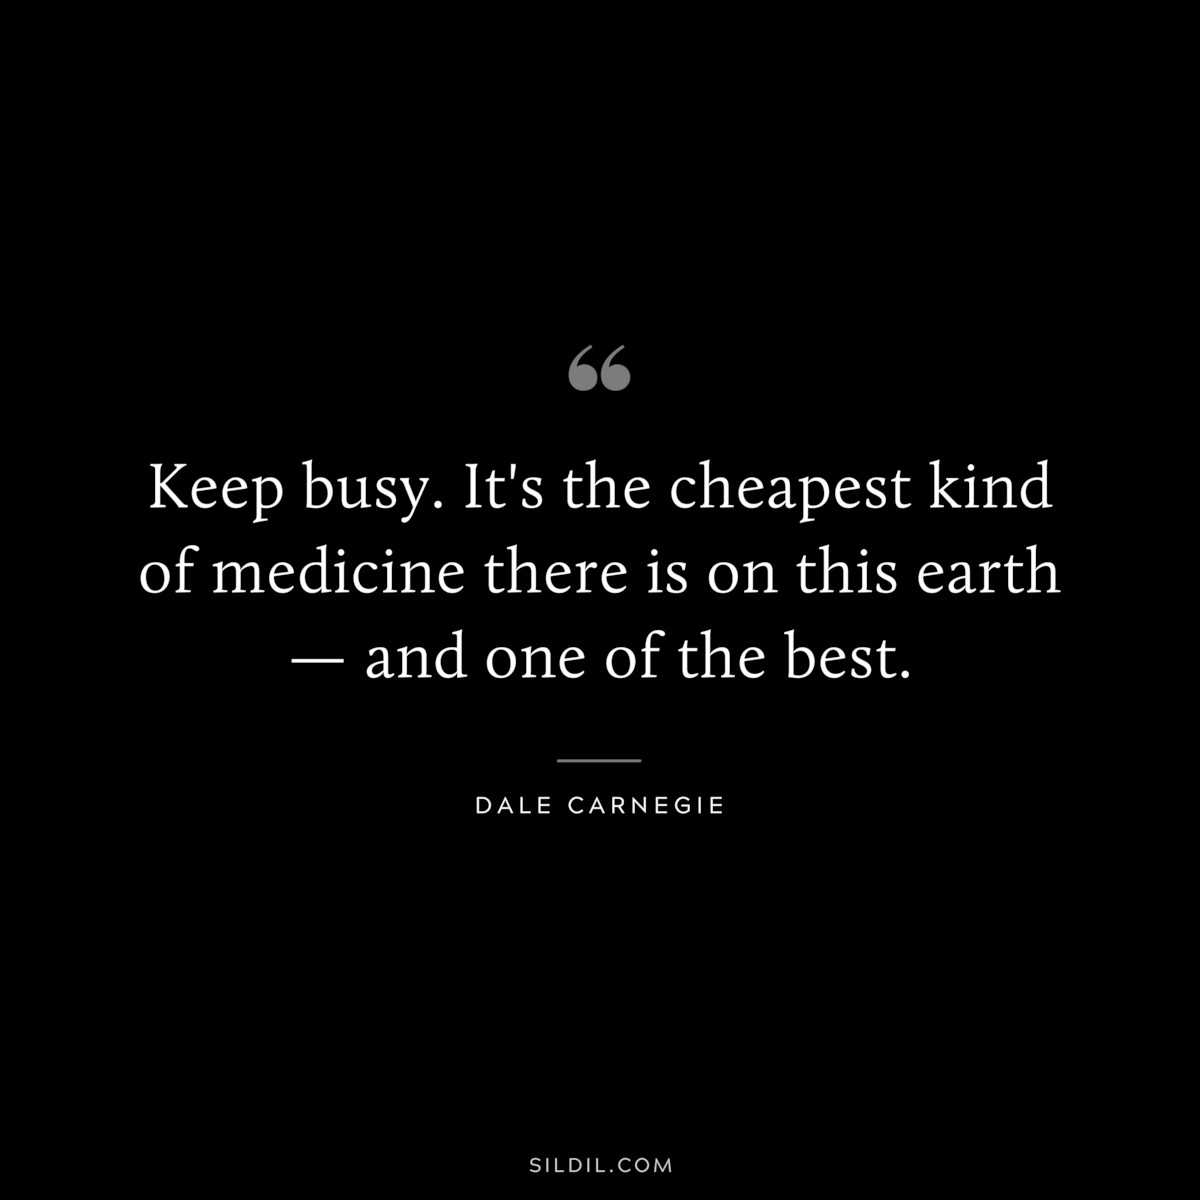 Keep busy. It's the cheapest kind of medicine there is on this earth — and one of the best.― Dale Carnegie